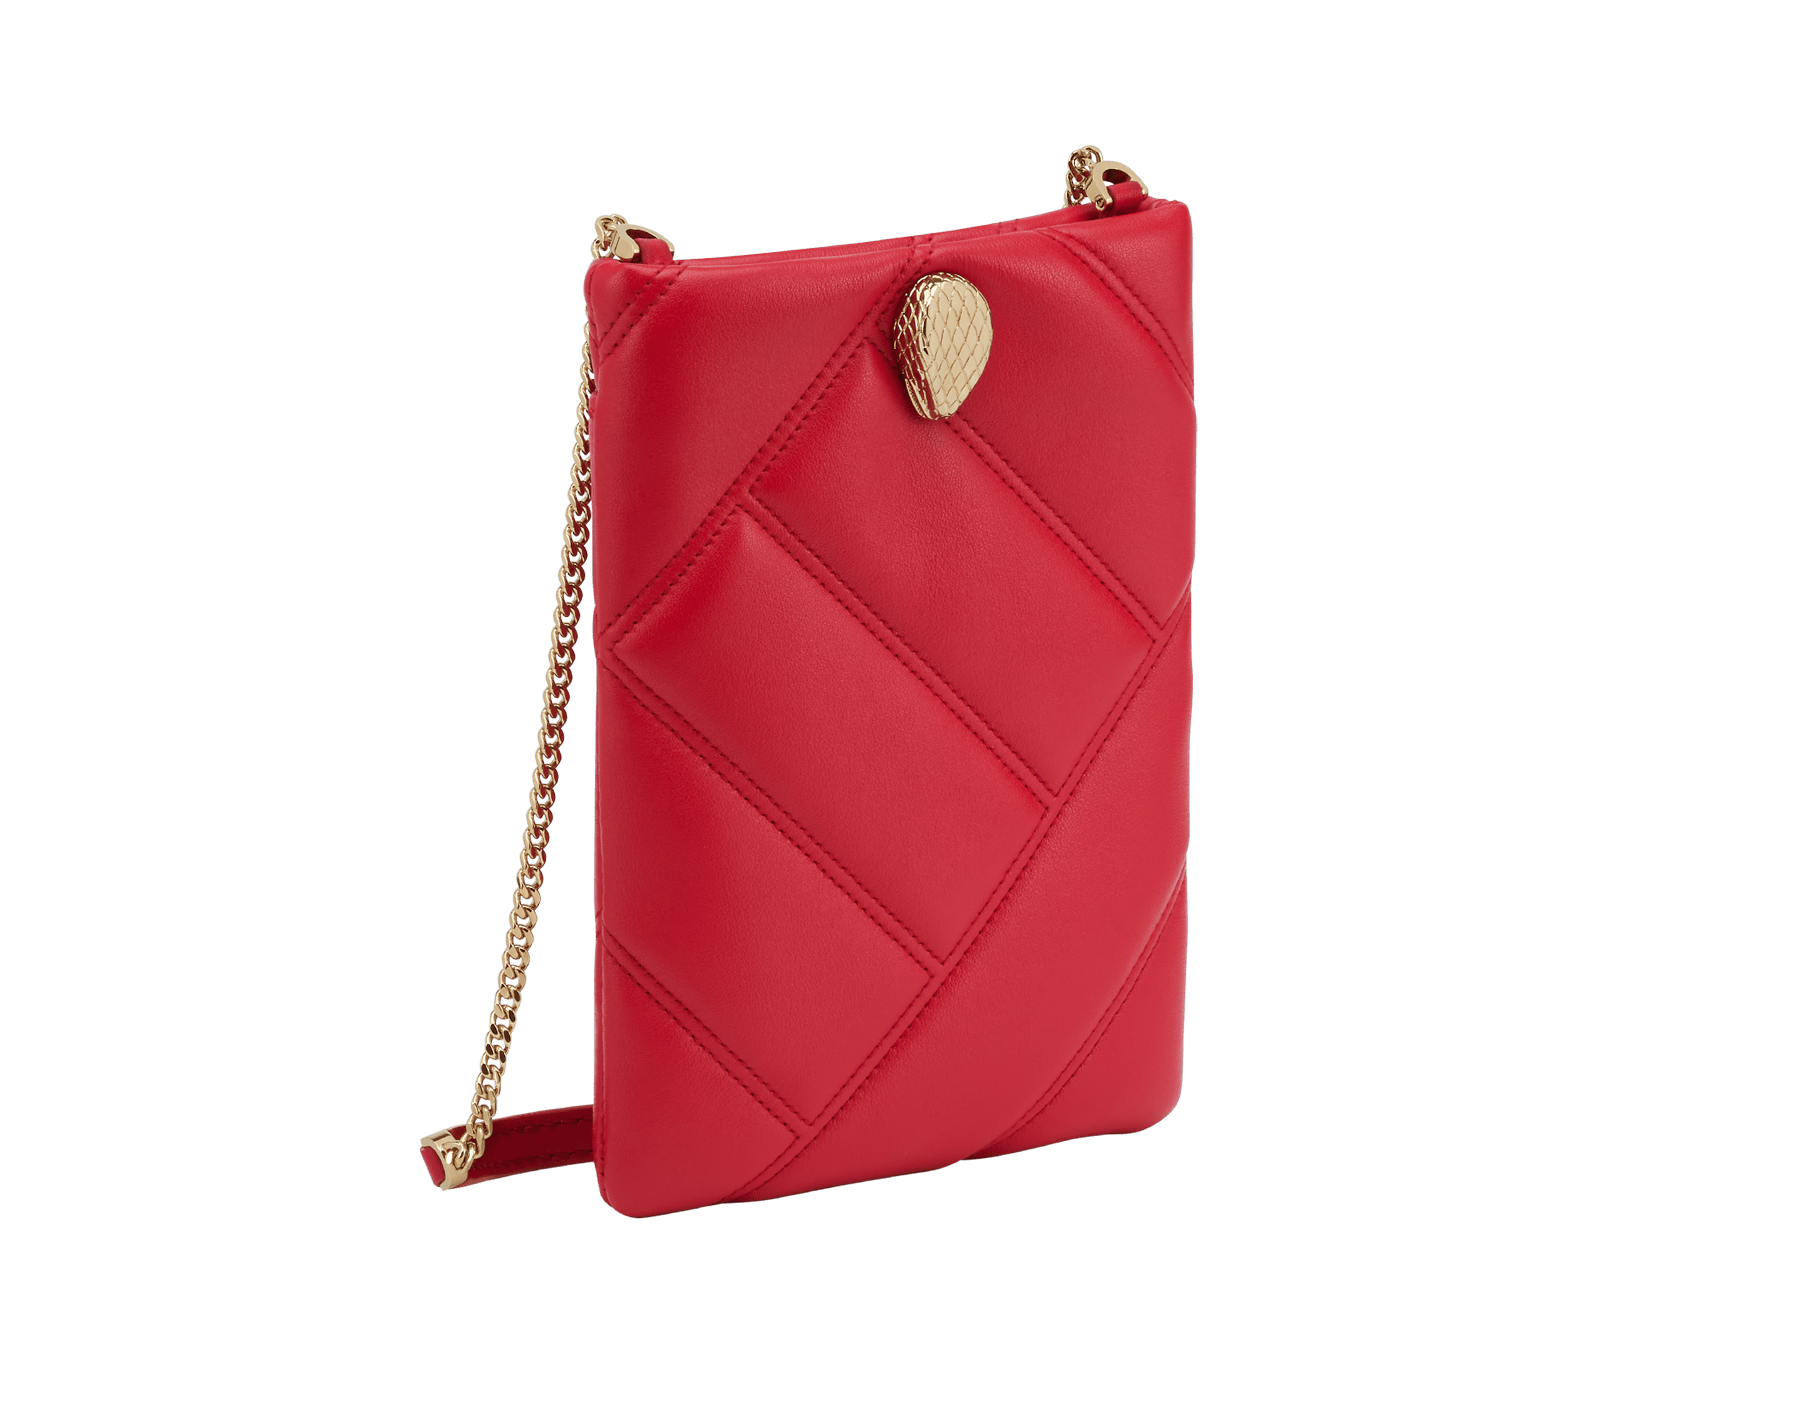 Serpenti Cabochon smart hybrid case in soft, black calf leather with maxi matelassé pattern and black nappa leather interior. Captivating, magnetic snakehead closure in gold-plated brass with with red enamel eyes. SCB-HYBRID image 1